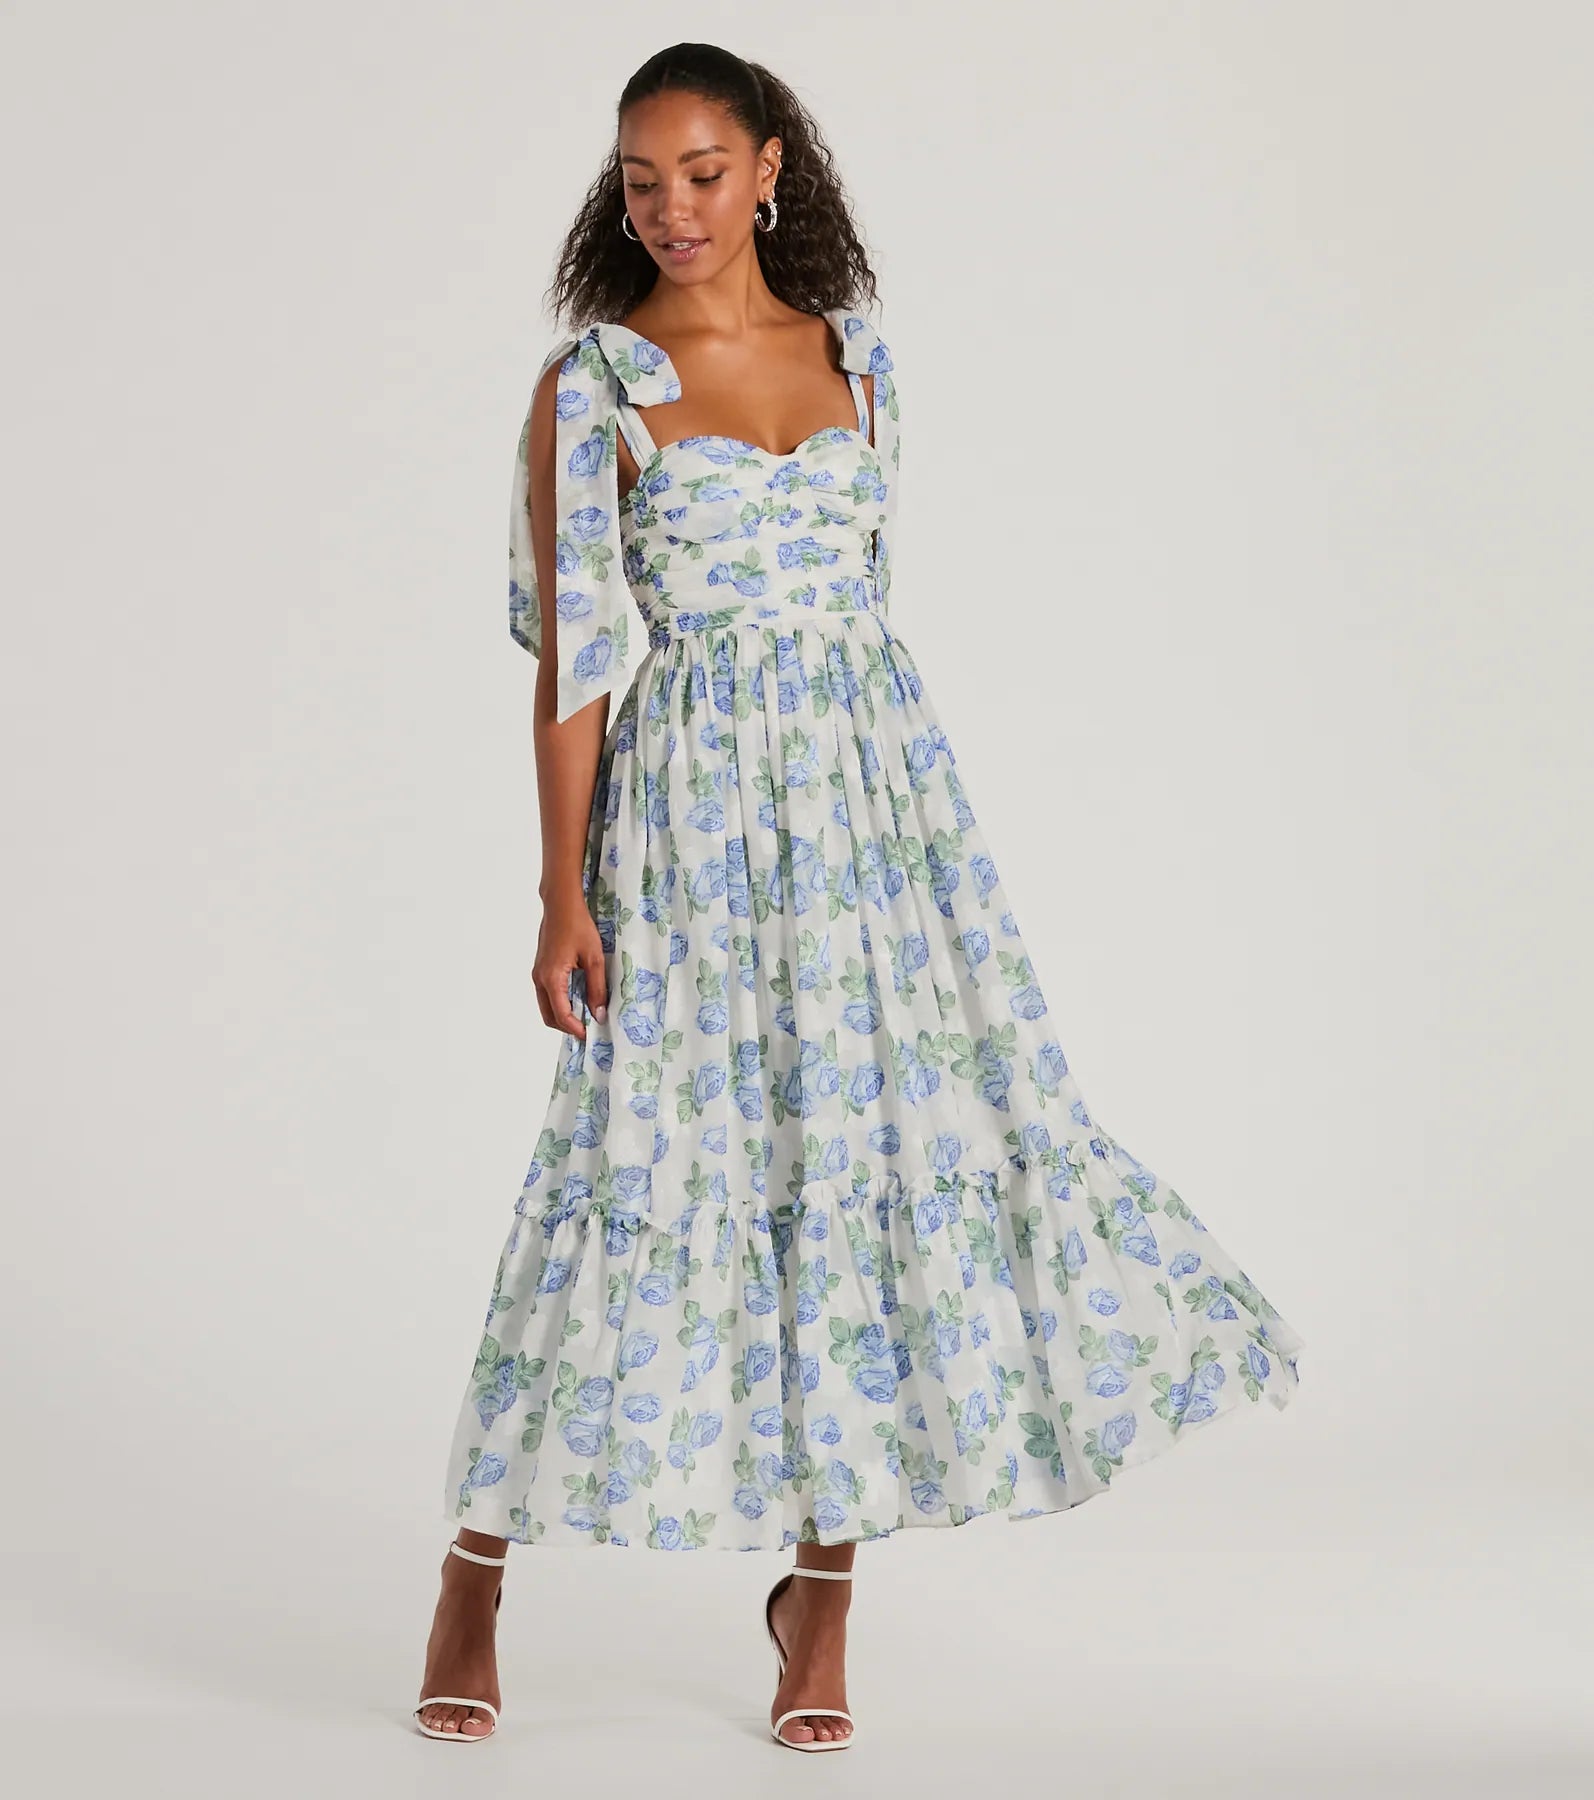 A-line Sweetheart Floral Print Ruched Back Zipper Stretchy Tulle Trim Midi Dress With Ruffles